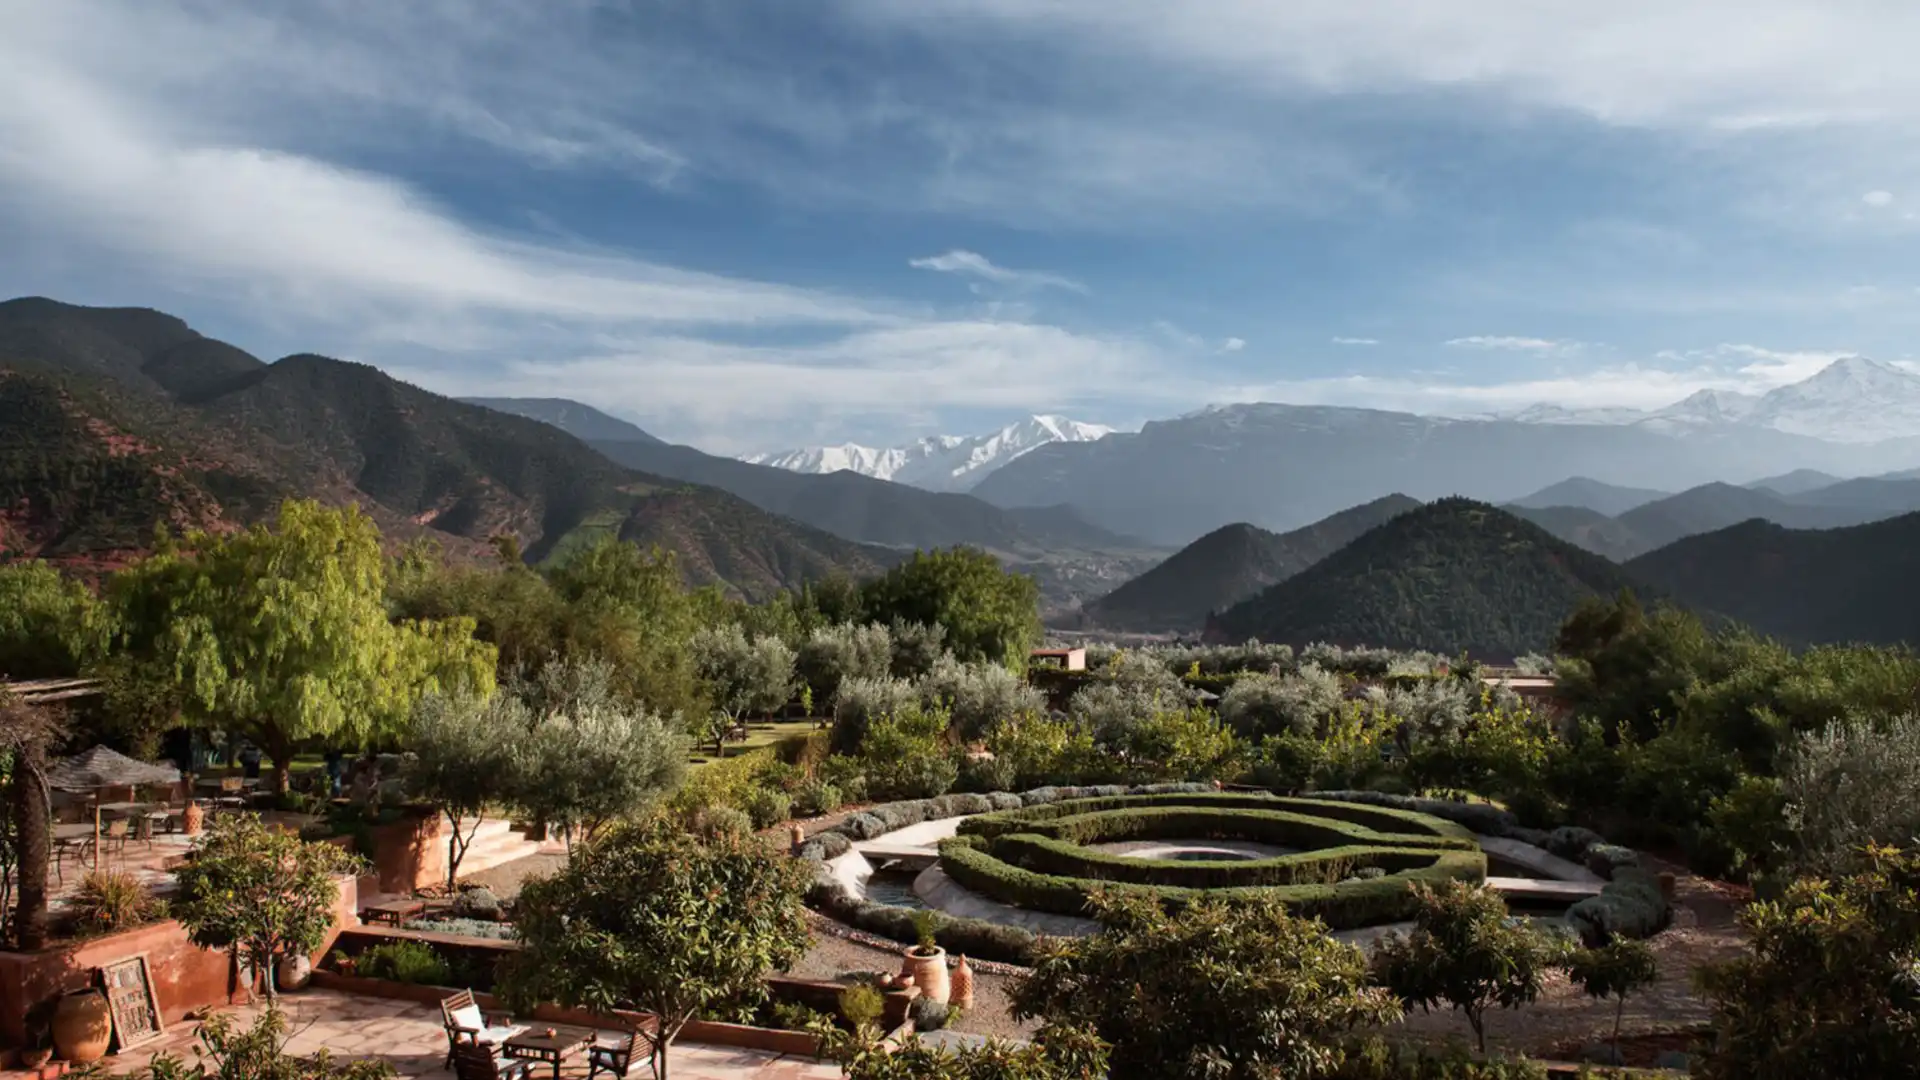 The Kasbahs of the Atlas Mountains